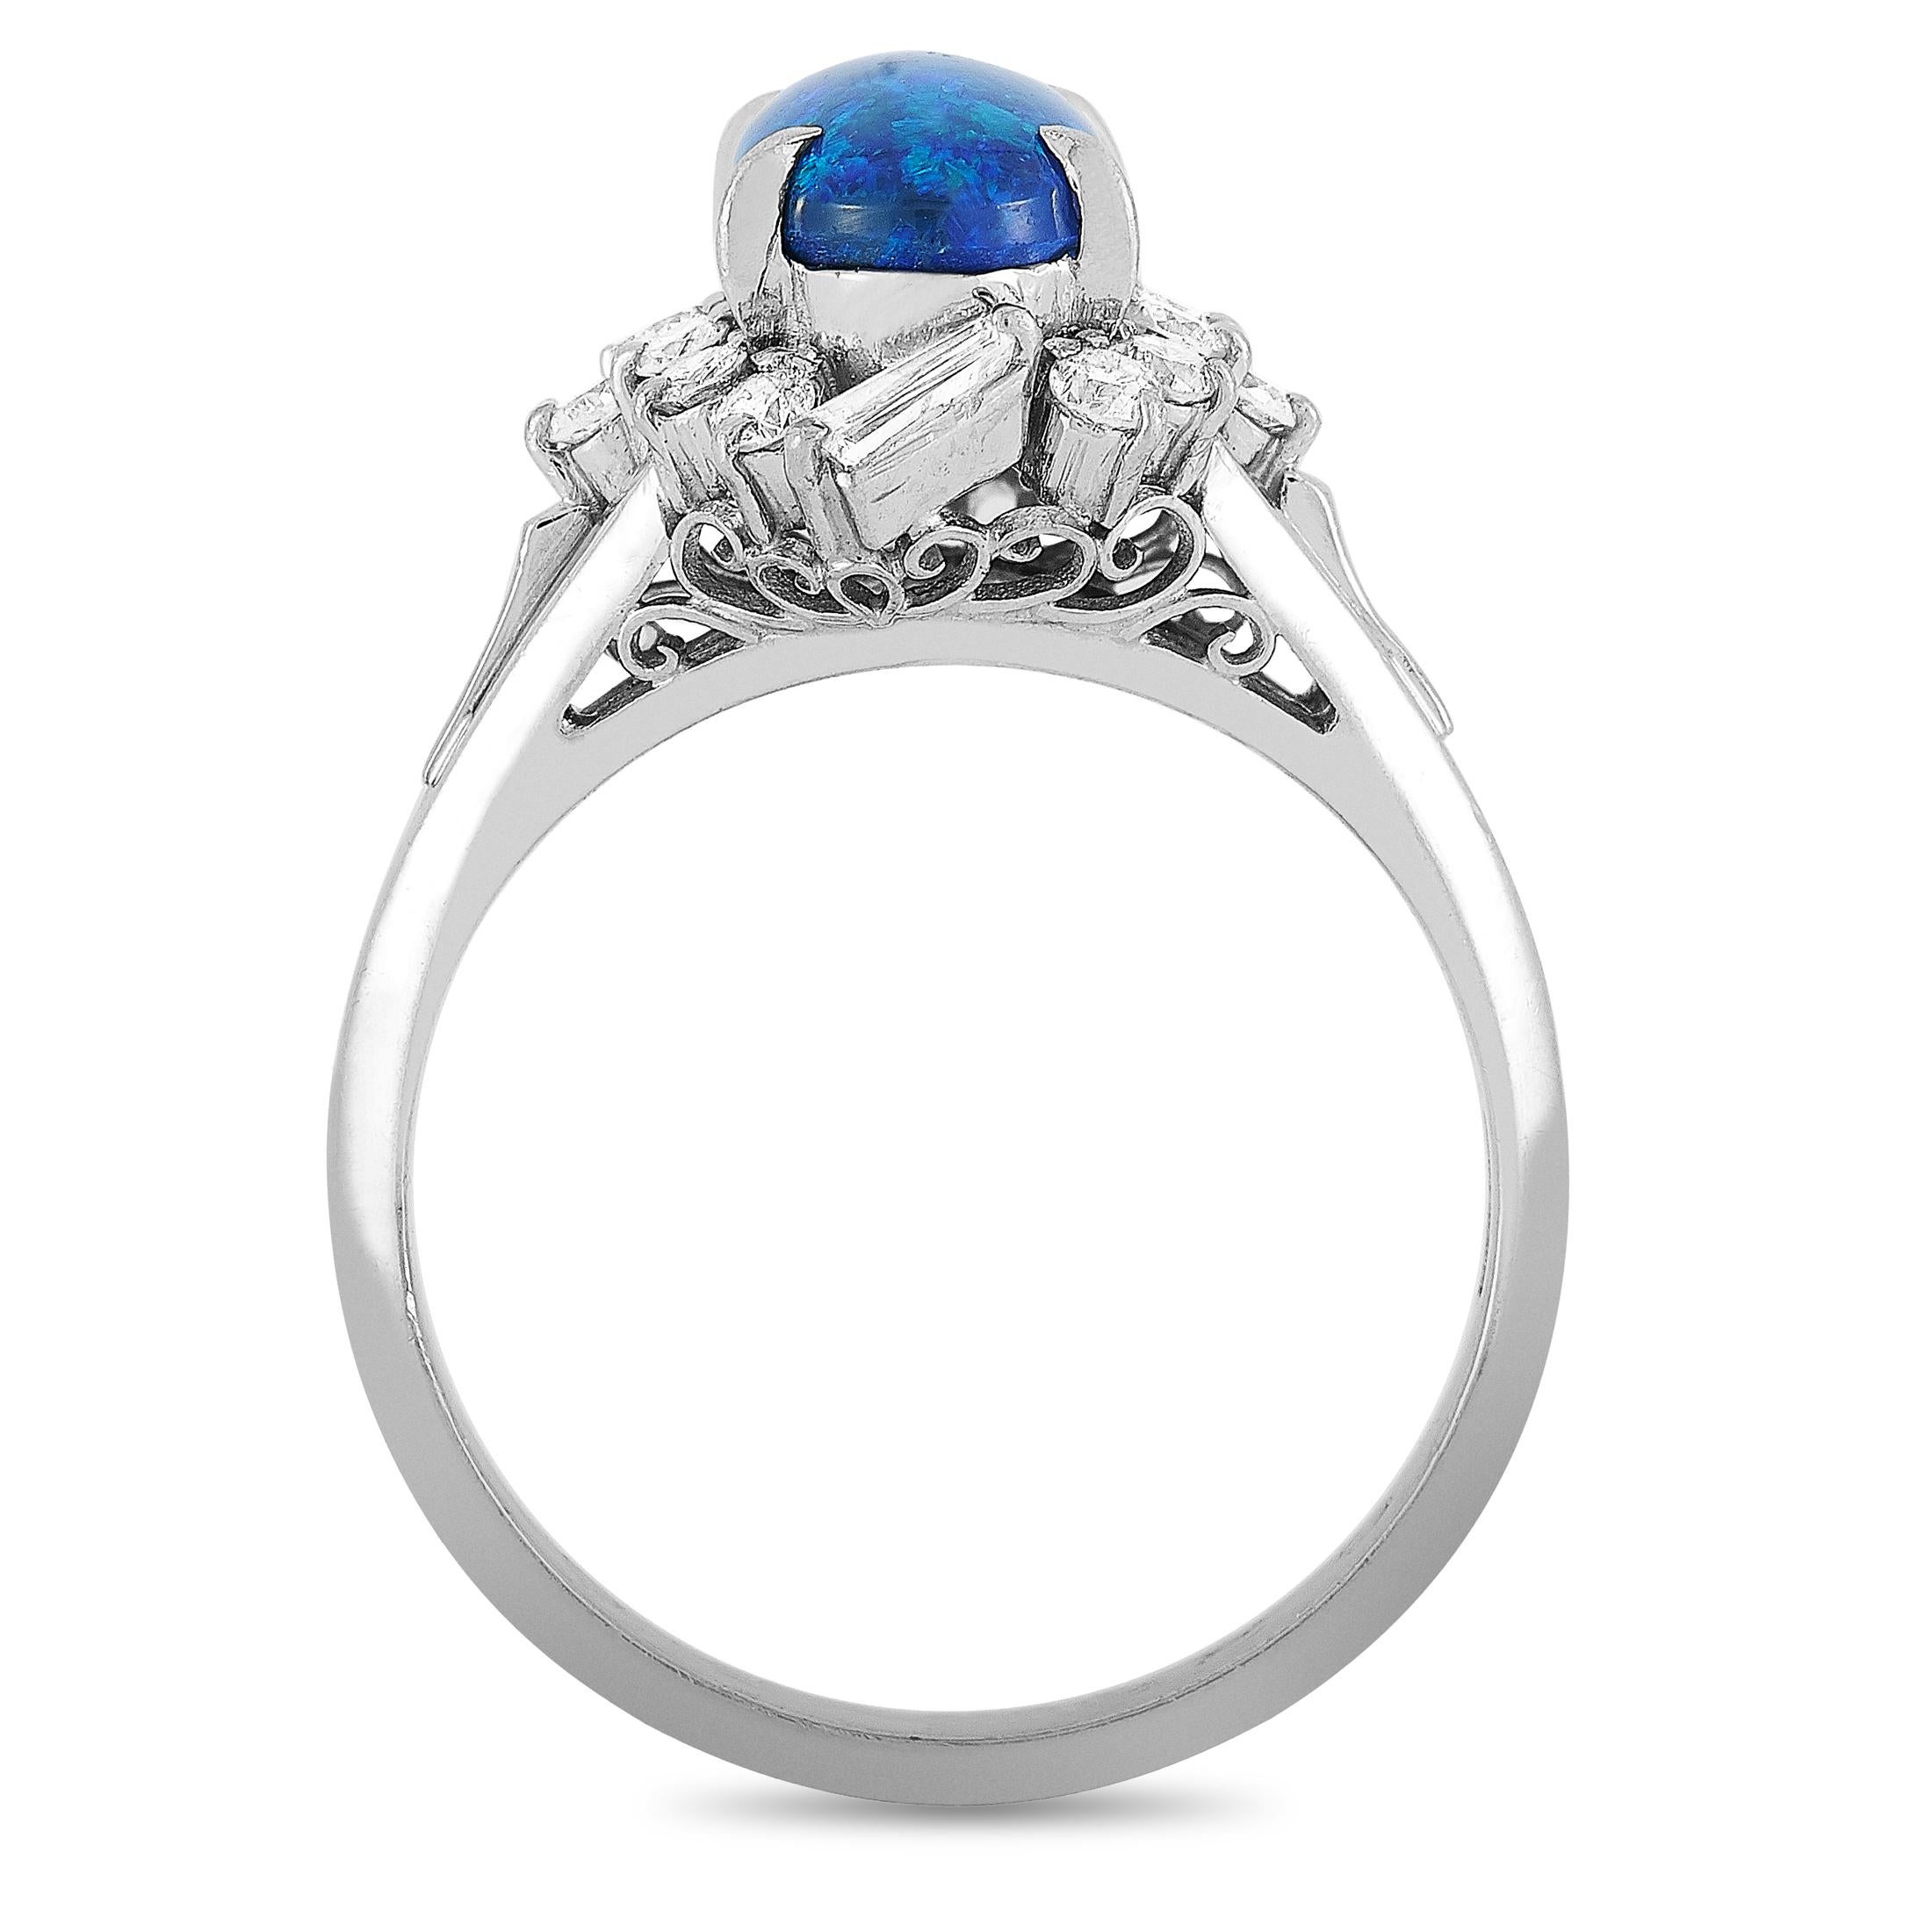 This LB Exclusive ring is crafted from platinum and weighs 6 grams. It boasts band thickness of 3 mm and top height of 8 mm, while top dimensions measure 11 by 13 mm. The ring is set with a 1.33 ct opal and a total of 0.42 carats of diamonds.
Ring